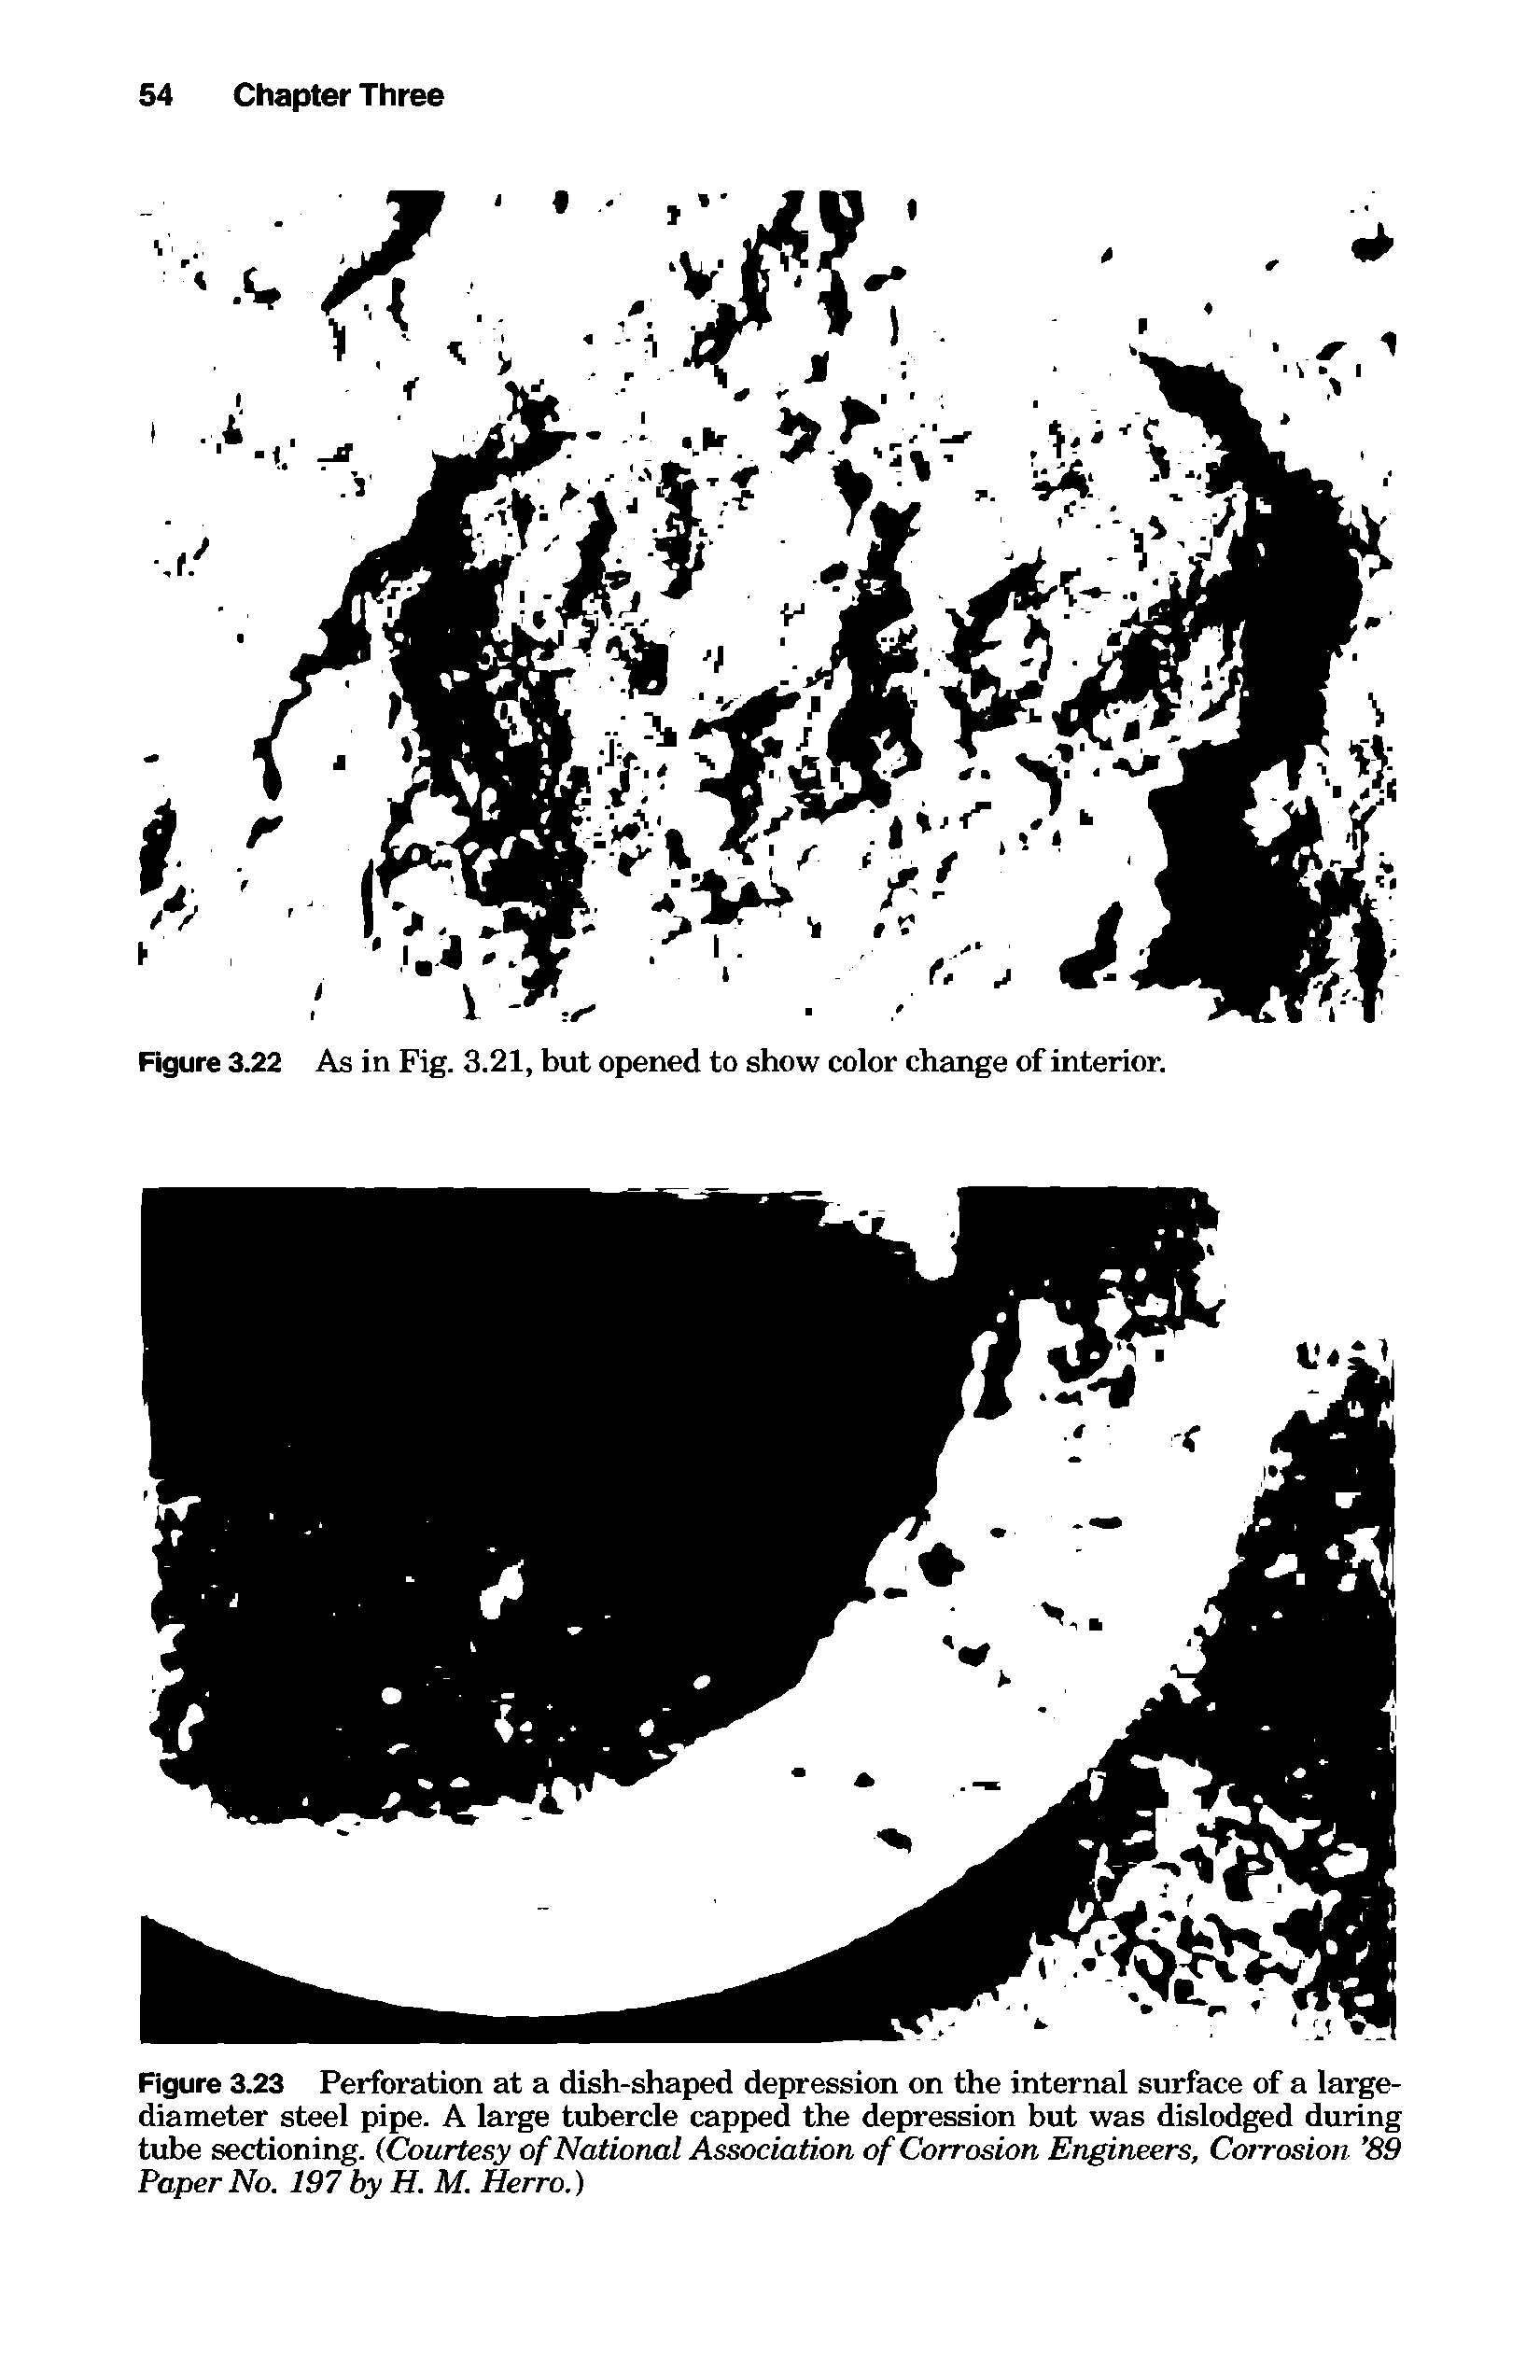 Figure 3.23 Perforation at a dish-shaped depression on the internal surface of a large-diameter steel pipe. A large tubercle capped the depression but was dislodged during tube sectioning. (Courtesy of National Association of Corrosion Engineers, Corrosion 89 Paper No. 197 by H. M. Herro.)...